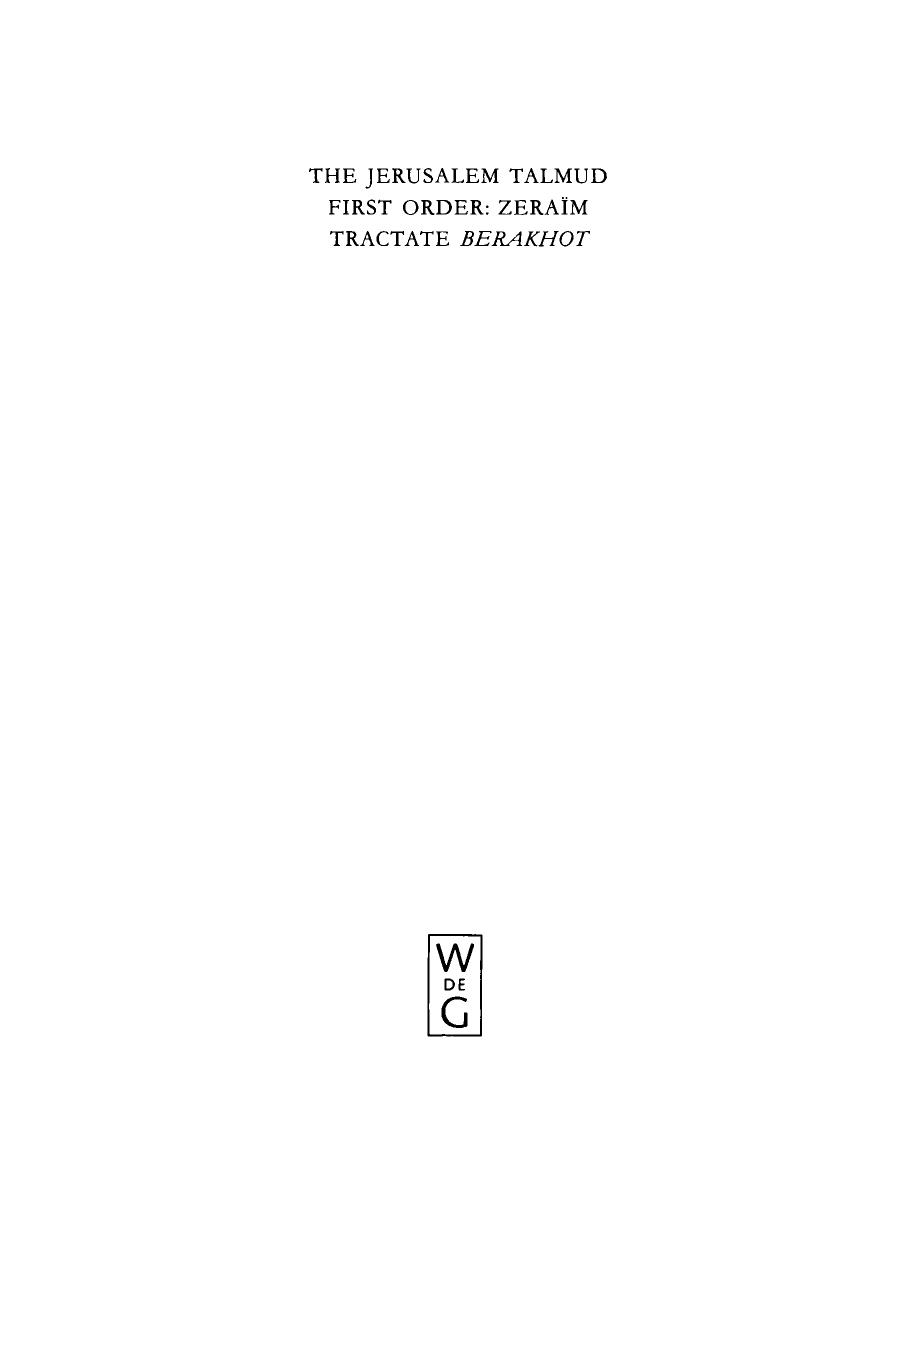 The Jerusalem Talmud: First Order - Zeraim, Tractate Berakhot : Edition, Translation, and Commentary by Heinrich W. Guggenheimer (editor)